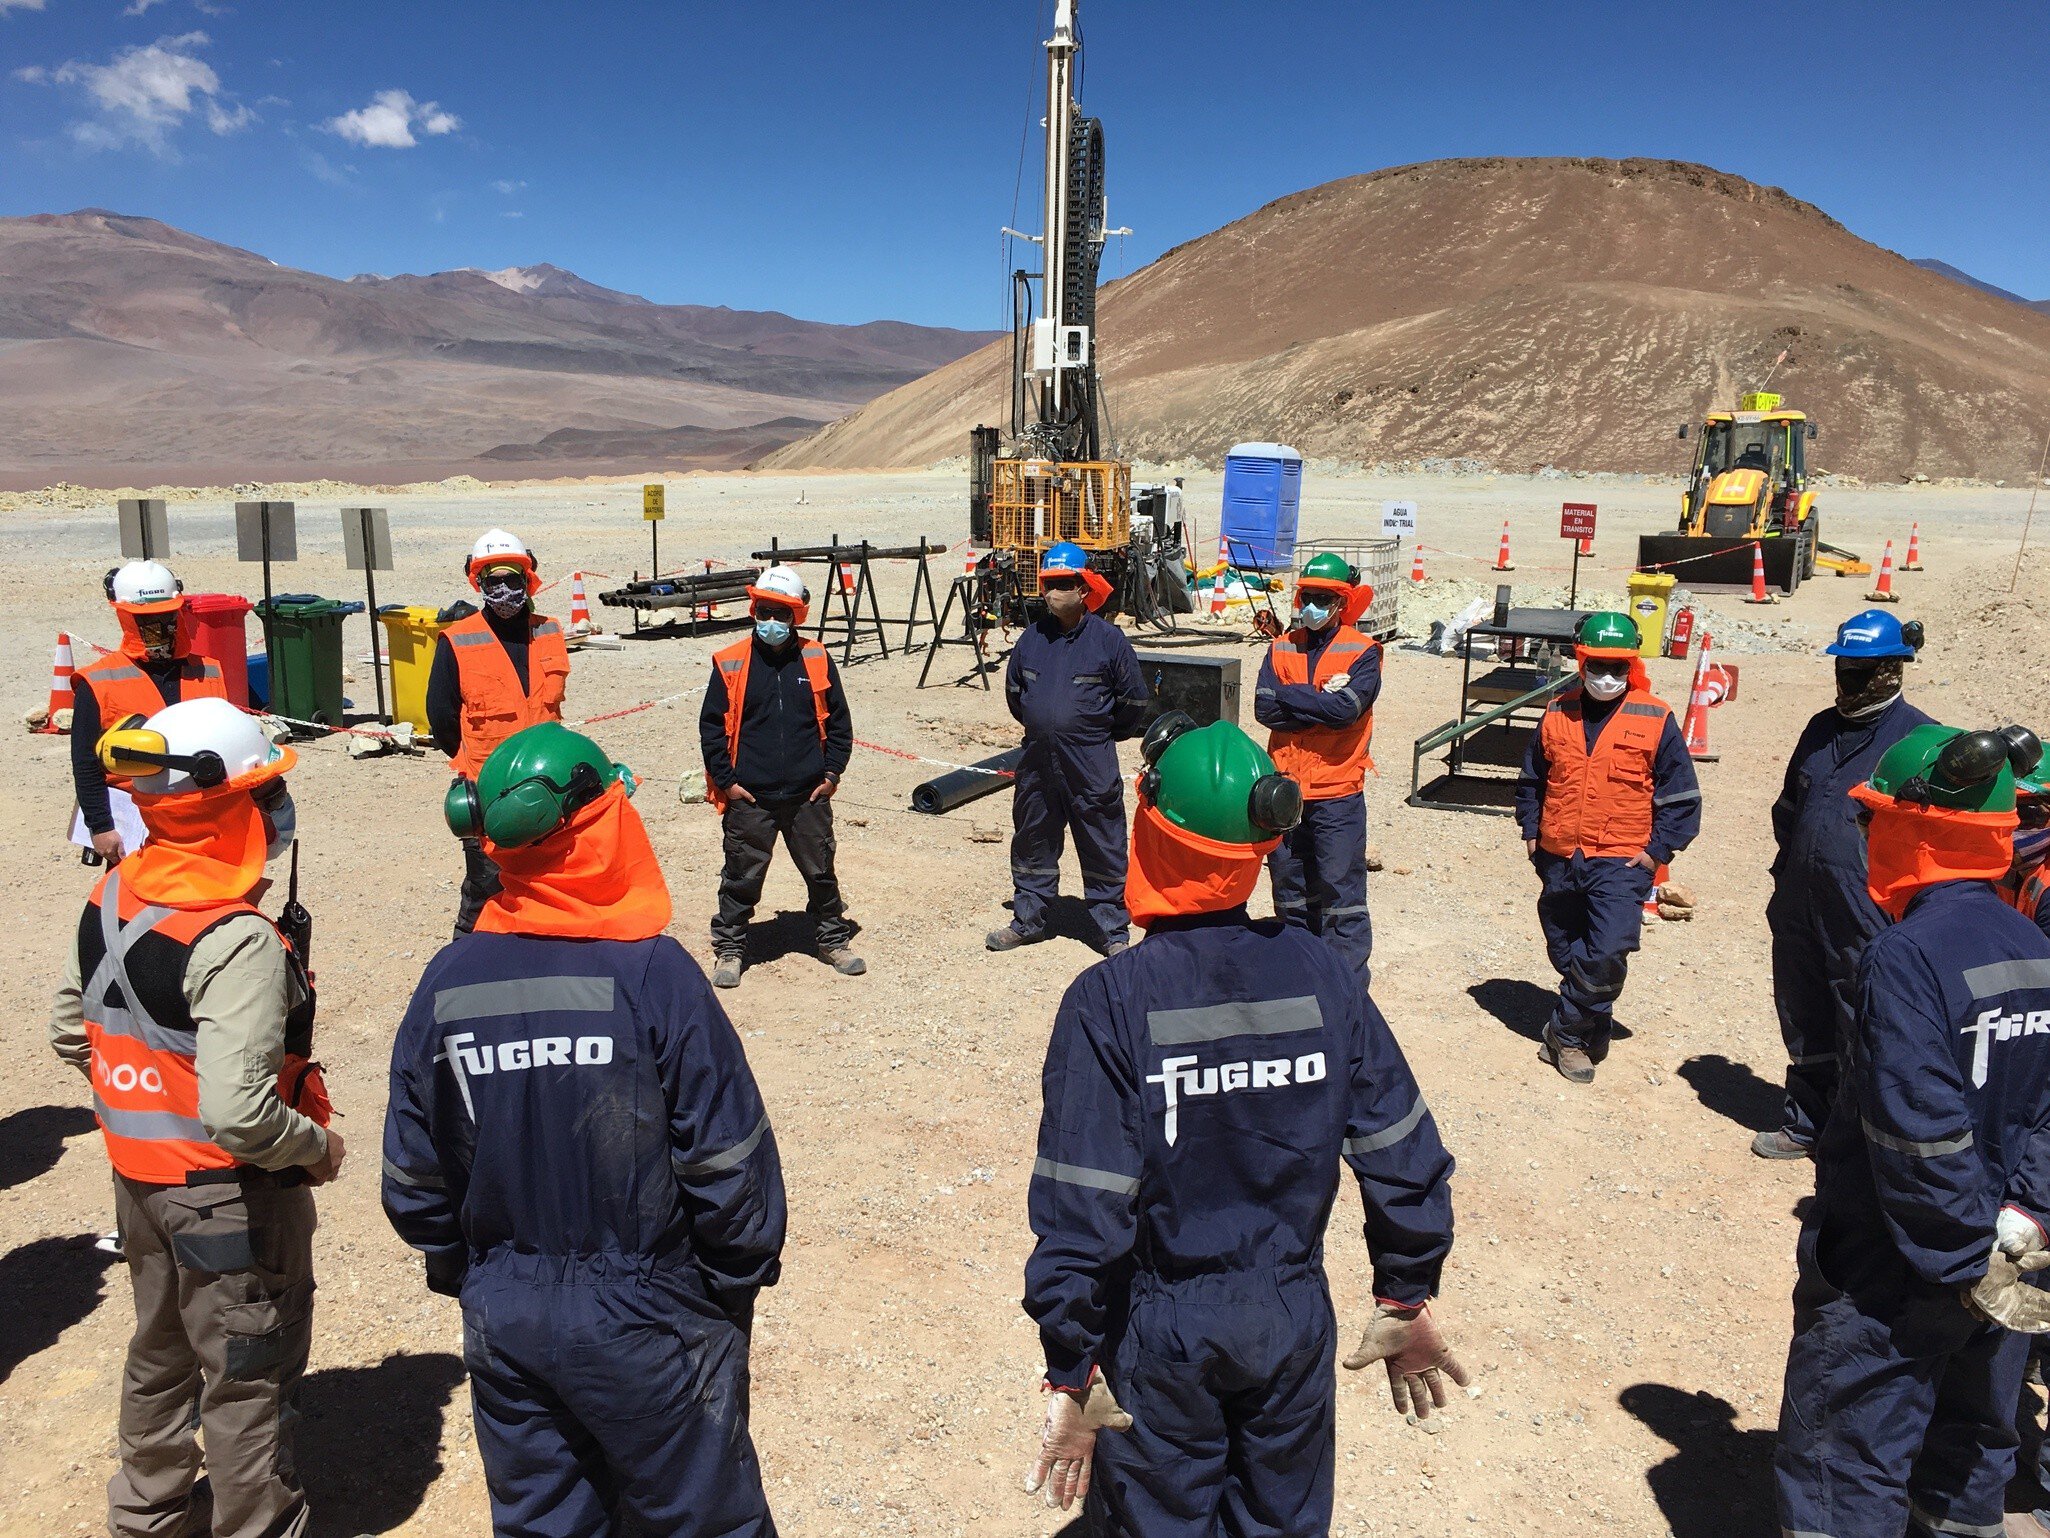 Conducting an onsite HSSE kick-off meeting for Lobo Marte Mine Site Investigation, Chile